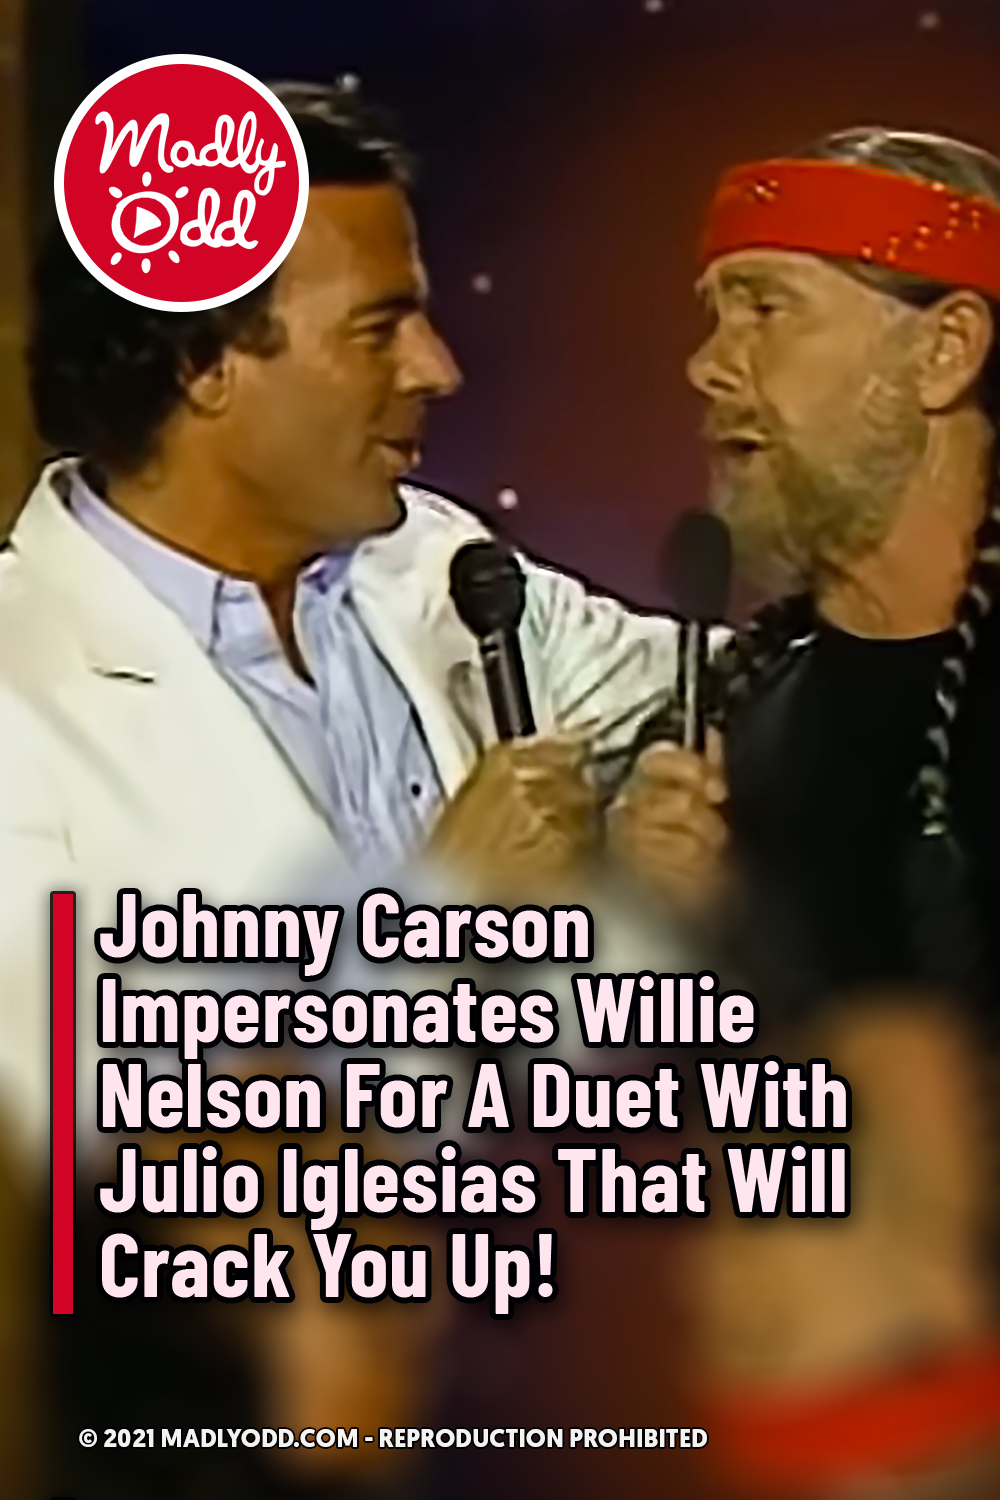 Johnny Carson Impersonates Willie Nelson For A Duet With Julio Iglesias That Will Crack You Up!